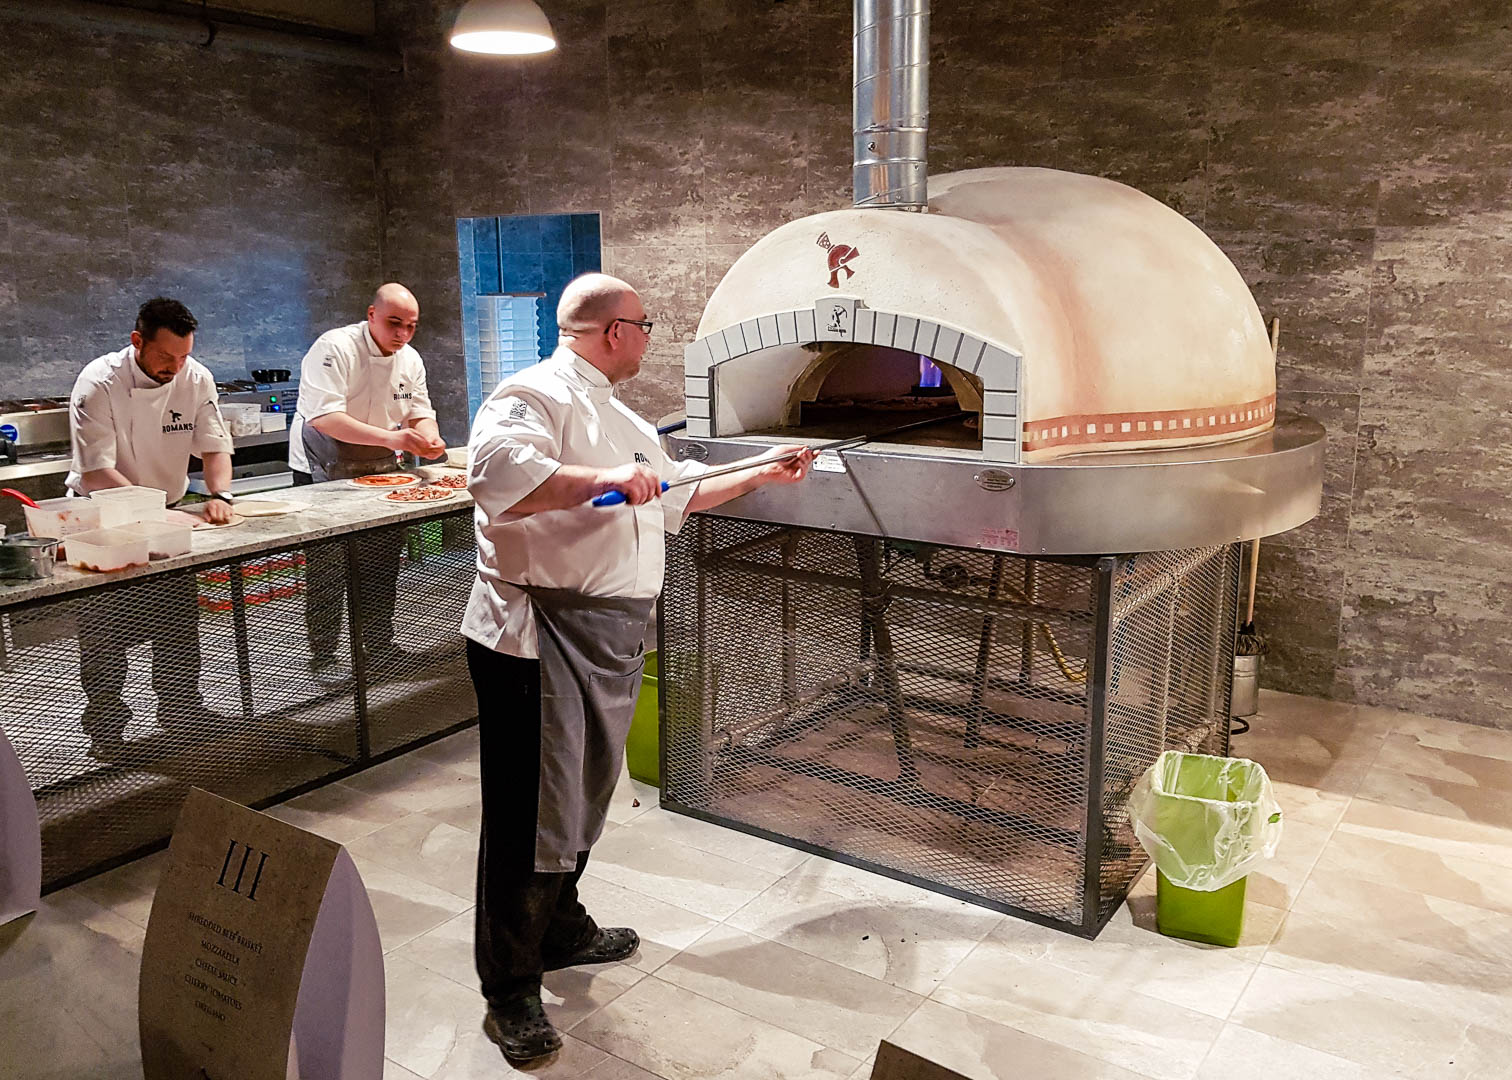 The pizza oven in the open kitchen at the new vegan-friendly restaurant Romans Pizzeria Glasgow.